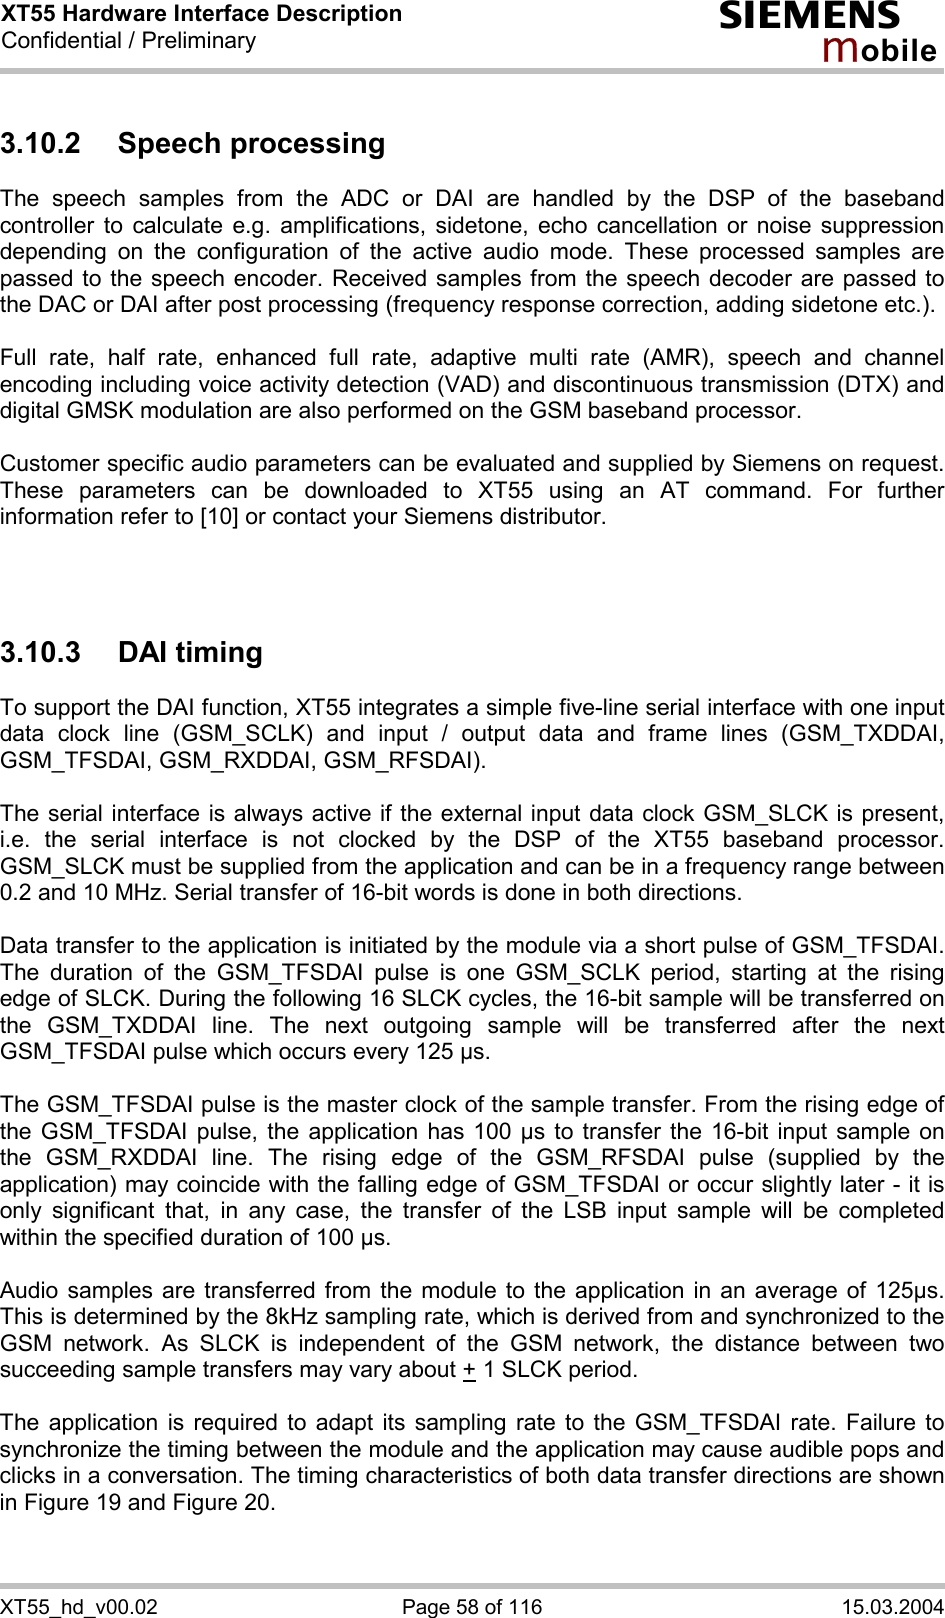 XT55 Hardware Interface Description Confidential / Preliminary s mo b i l e XT55_hd_v00.02  Page 58 of 116  15.03.2004 3.10.2 Speech processing The speech samples from the ADC or DAI are handled by the DSP of the baseband controller to calculate e.g. amplifications, sidetone, echo cancellation or noise suppression depending on the configuration of the active audio mode. These processed samples are passed to the speech encoder. Received samples from the speech decoder are passed to the DAC or DAI after post processing (frequency response correction, adding sidetone etc.).  Full rate, half rate, enhanced full rate, adaptive multi rate (AMR), speech and channel encoding including voice activity detection (VAD) and discontinuous transmission (DTX) and digital GMSK modulation are also performed on the GSM baseband processor.  Customer specific audio parameters can be evaluated and supplied by Siemens on request. These parameters can be downloaded to XT55 using an AT command. For further information refer to [10] or contact your Siemens distributor.    3.10.3 DAI timing To support the DAI function, XT55 integrates a simple five-line serial interface with one input data clock line (GSM_SCLK) and input / output data and frame lines (GSM_TXDDAI, GSM_TFSDAI, GSM_RXDDAI, GSM_RFSDAI).   The serial interface is always active if the external input data clock GSM_SLCK is present, i.e. the serial interface is not clocked by the DSP of the XT55 baseband processor. GSM_SLCK must be supplied from the application and can be in a frequency range between 0.2 and 10 MHz. Serial transfer of 16-bit words is done in both directions.   Data transfer to the application is initiated by the module via a short pulse of GSM_TFSDAI. The duration of the GSM_TFSDAI pulse is one GSM_SCLK period, starting at the rising edge of SLCK. During the following 16 SLCK cycles, the 16-bit sample will be transferred on the GSM_TXDDAI line. The next outgoing sample will be transferred after the next GSM_TFSDAI pulse which occurs every 125 µs.   The GSM_TFSDAI pulse is the master clock of the sample transfer. From the rising edge of the GSM_TFSDAI pulse, the application has 100 µs to transfer the 16-bit input sample on the GSM_RXDDAI line. The rising edge of the GSM_RFSDAI pulse (supplied by the application) may coincide with the falling edge of GSM_TFSDAI or occur slightly later - it is only significant that, in any case, the transfer of the LSB input sample will be completed within the specified duration of 100 µs.   Audio samples are transferred from the module to the application in an average of 125µs. This is determined by the 8kHz sampling rate, which is derived from and synchronized to the GSM network. As SLCK is independent of the GSM network, the distance between two succeeding sample transfers may vary about + 1 SLCK period.  The application is required to adapt its sampling rate to the GSM_TFSDAI rate. Failure to synchronize the timing between the module and the application may cause audible pops and clicks in a conversation. The timing characteristics of both data transfer directions are shown in Figure 19 and Figure 20.  